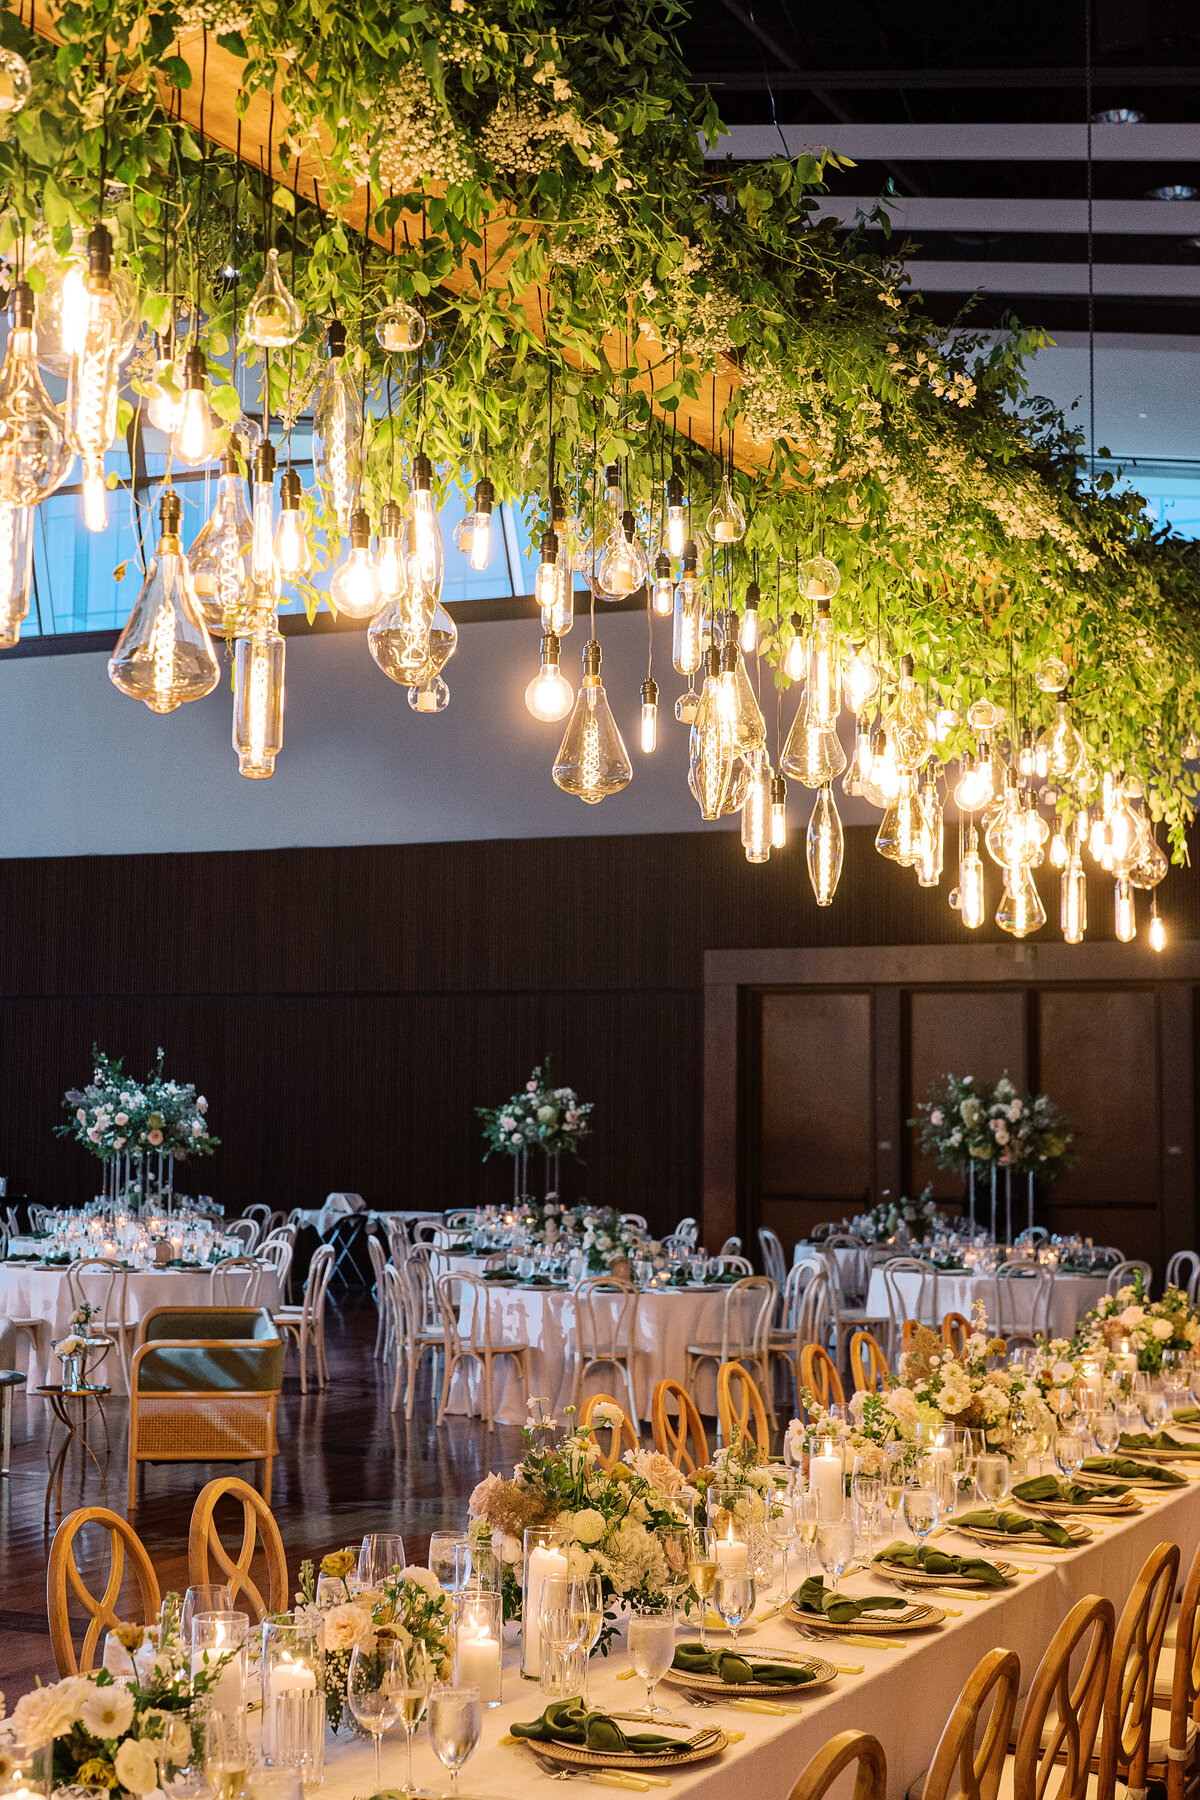 Epic floral installation for garden-inspired summer wedding. Large and lush floral install over head table for timeless wedding design. Vine-like greenery and florals accent this hanging Edison bulb installation. Downtown classic white and green wedding. Design by Rosemary & Finch Floral Design in Nashville, TN.